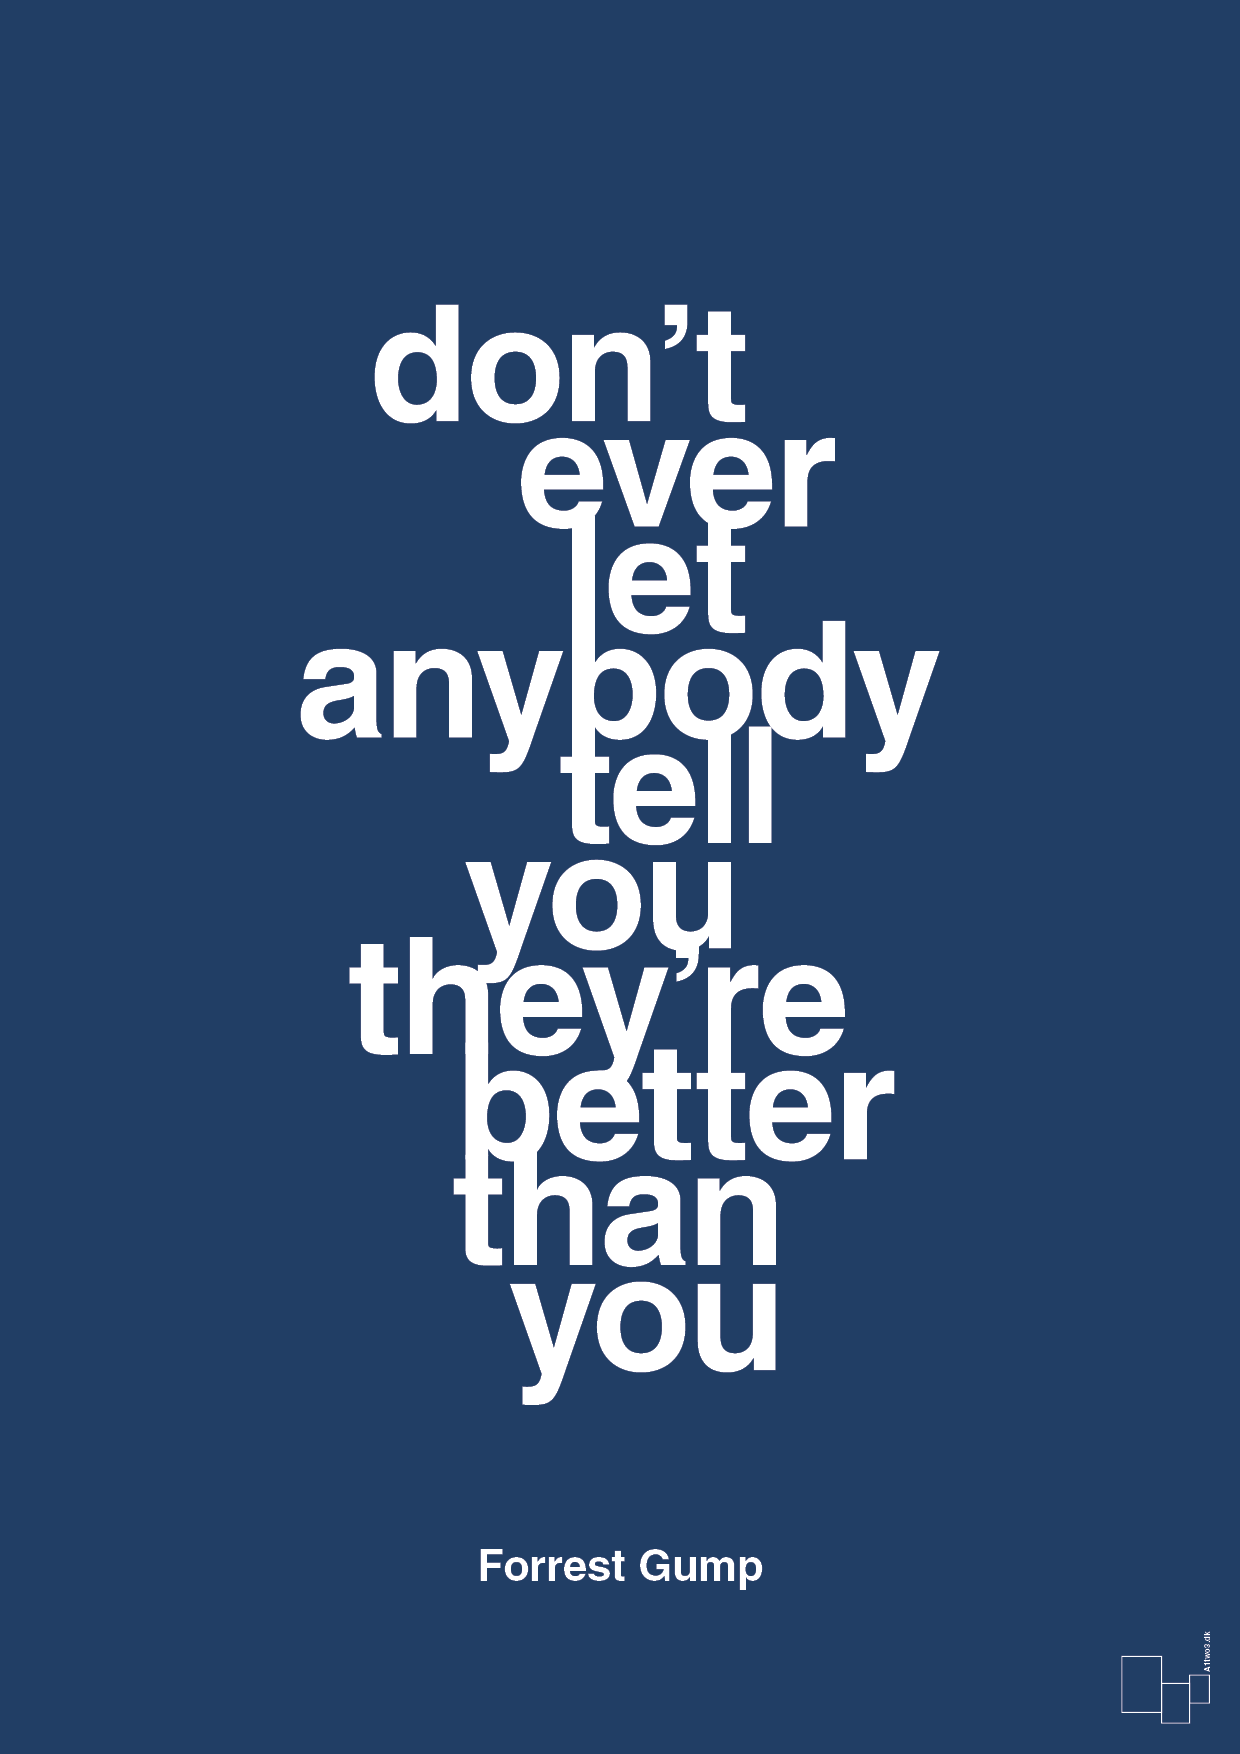 don’t ever let anybody tell you they’re better than you - Plakat med Citater i Lapis Blue